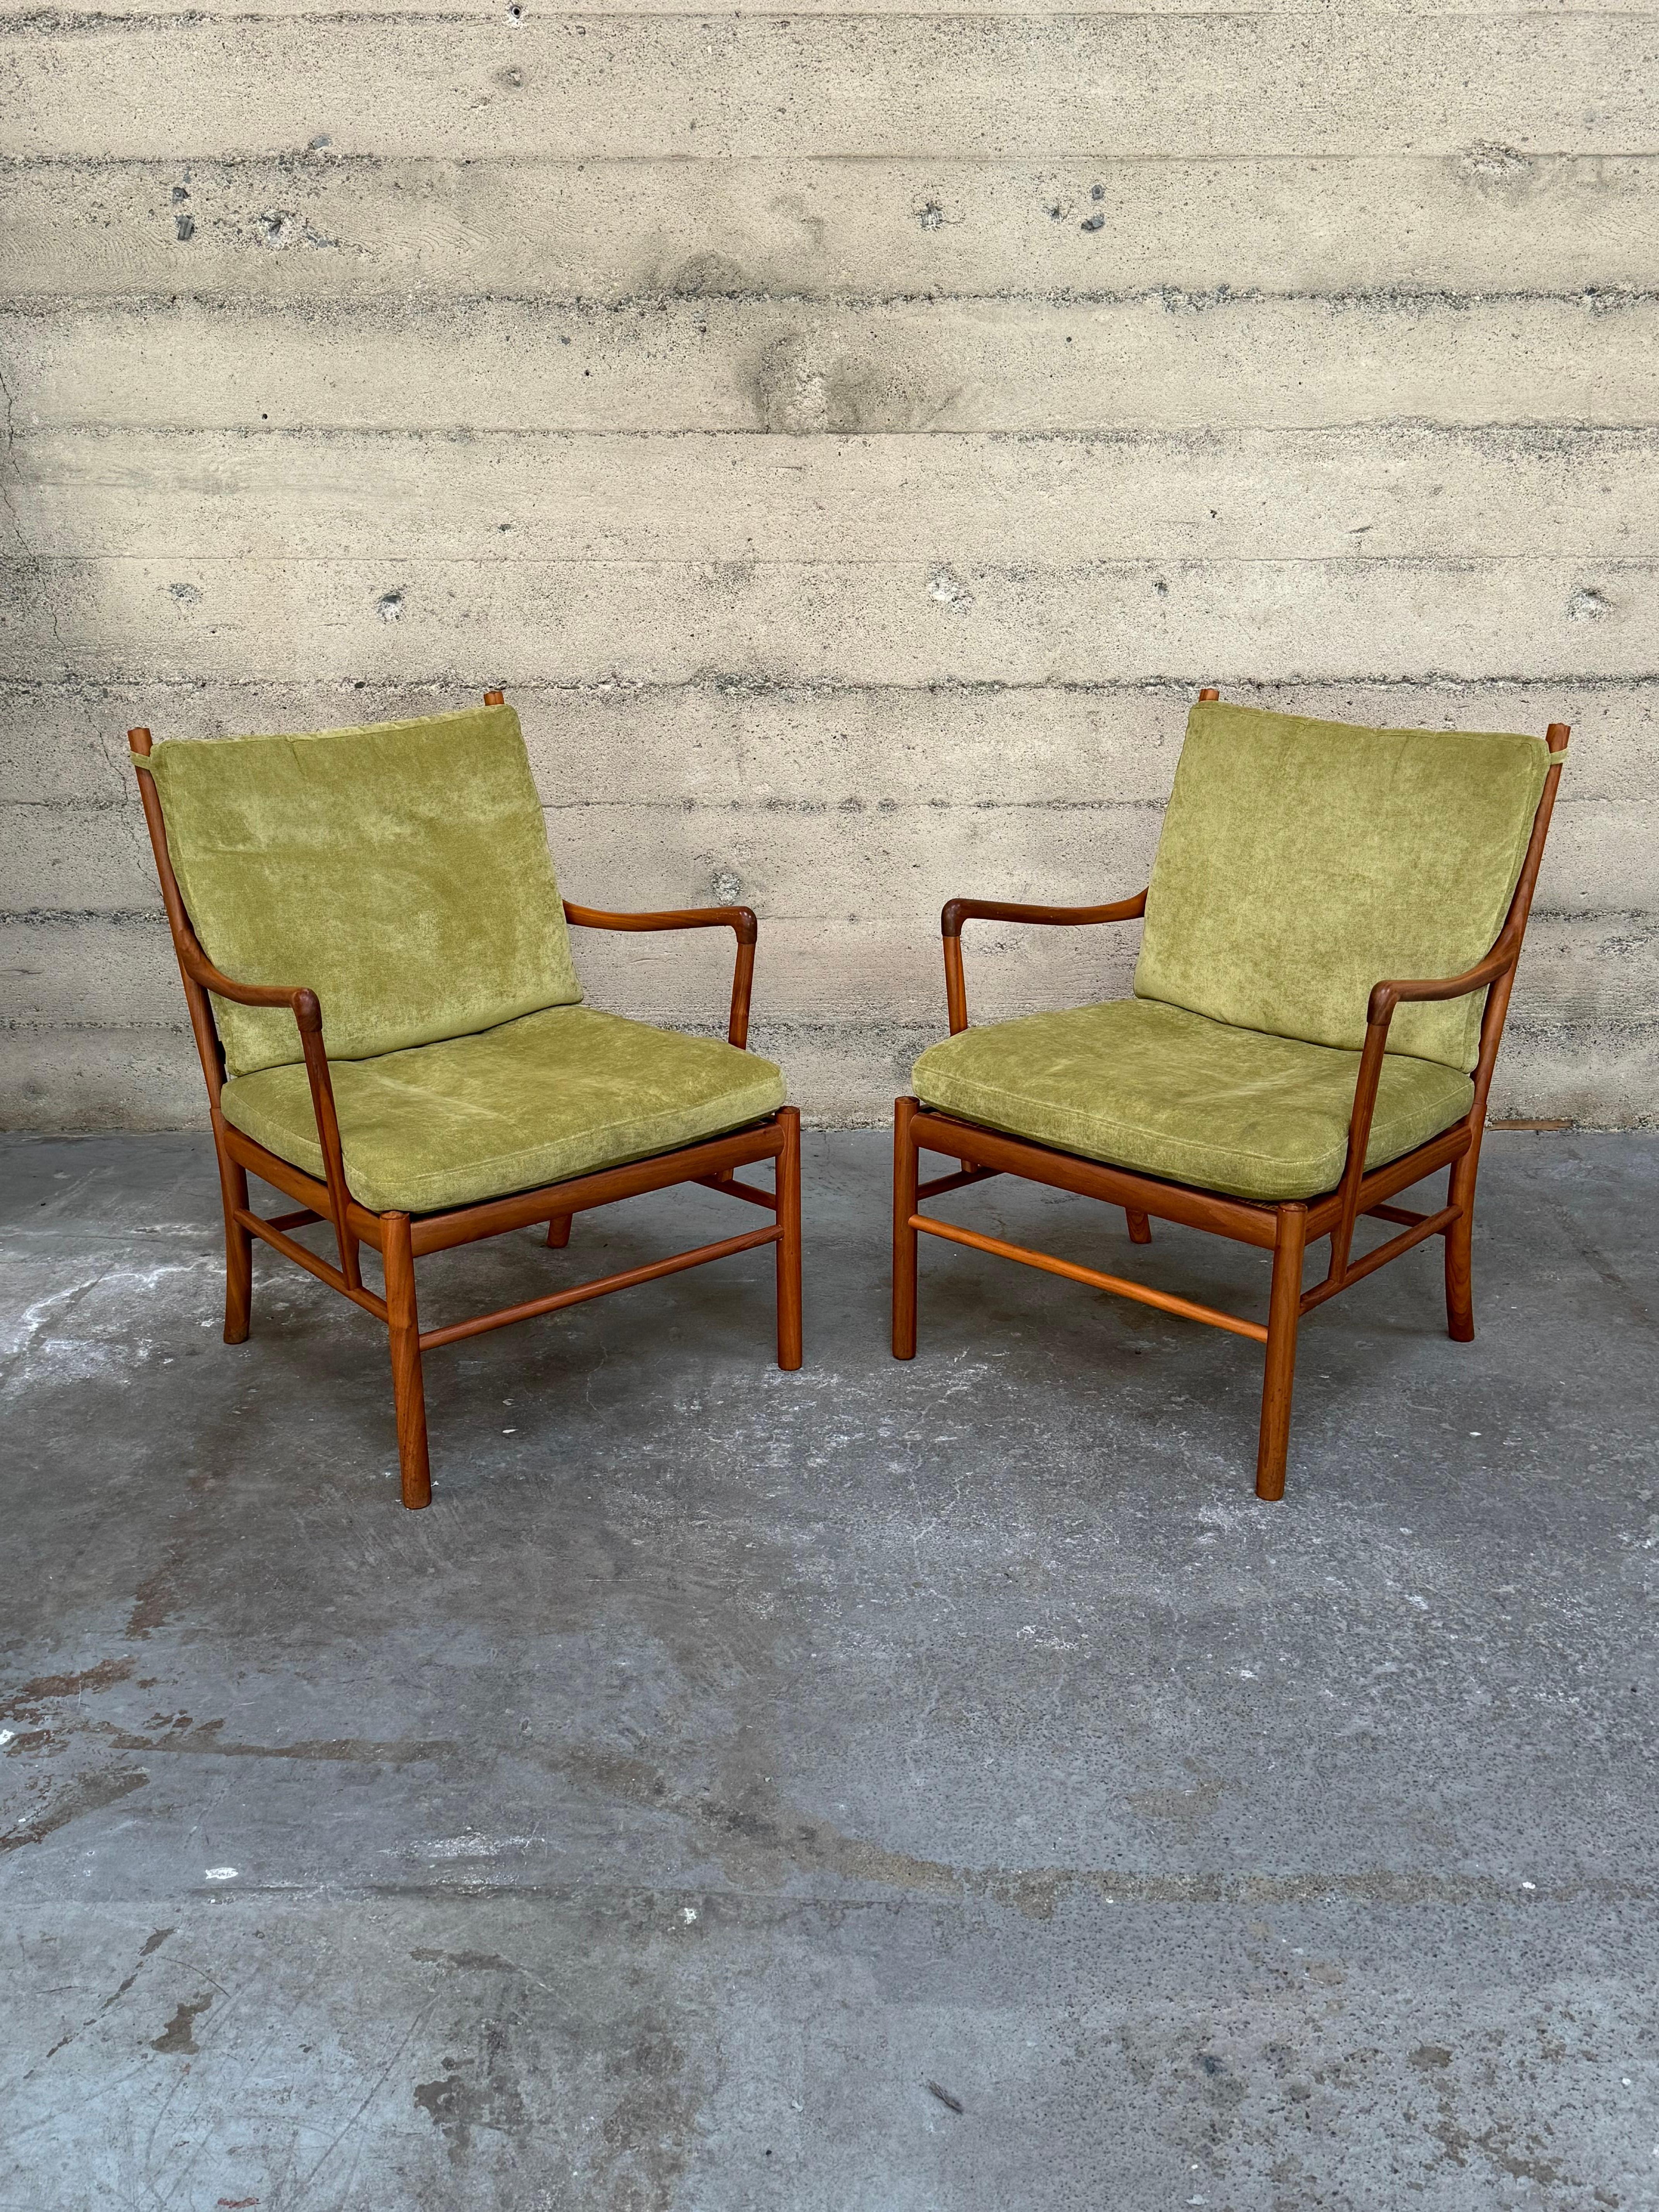 A pair of Ole Wanscher Colonial 149 armchairs in walnut, with cane seats and  green fabric cushions. These are newer production pieces produced within the last 25 years or so. Sculptural flowing frames with gracefully shaped arms and turned back